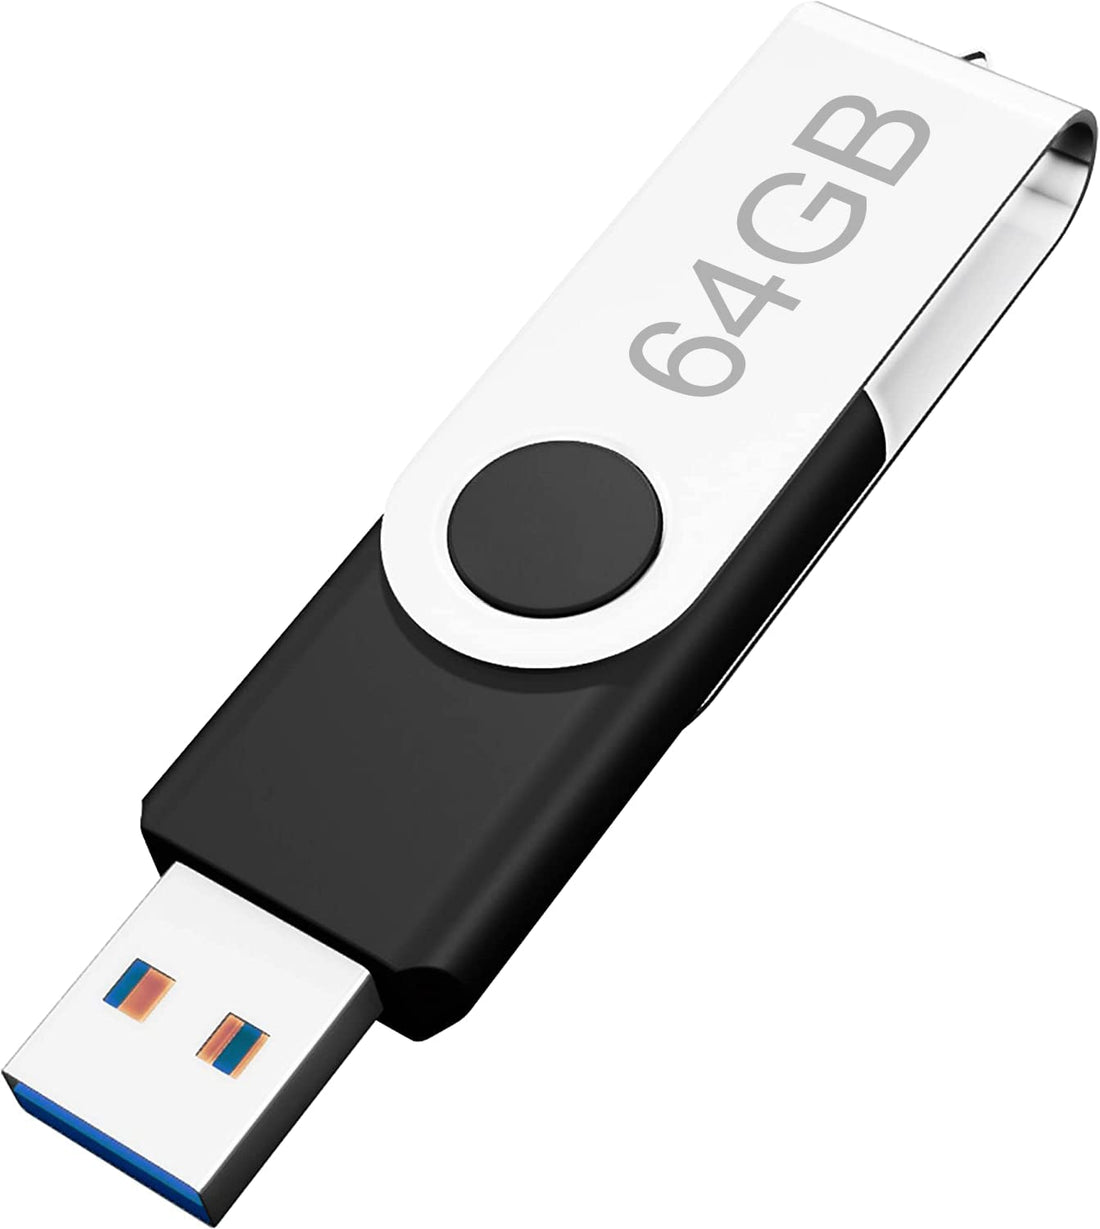 64GB USB Flash Drive, Portable Metal Drive 64GB, Ultra-Speed Small Spinning USB Drive Compatible with Computer/Laptop